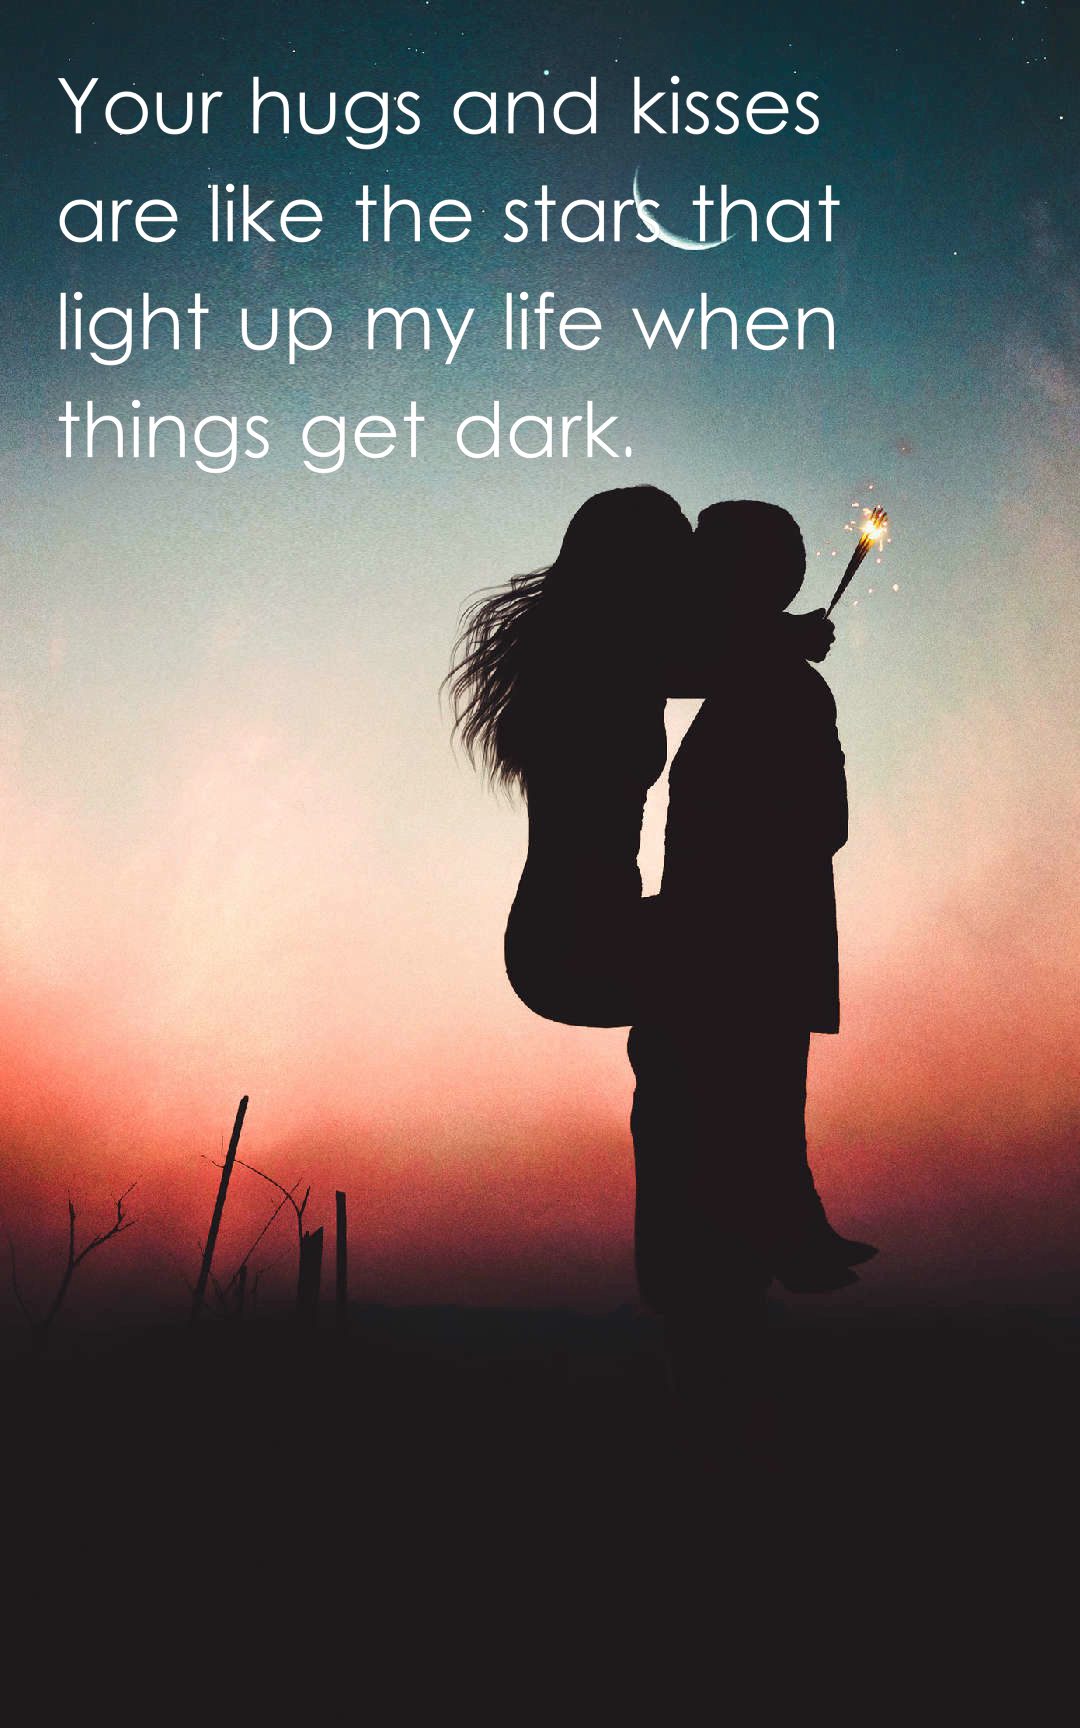 Your hugs and kisses are like the stars that light up my life when things get dark.